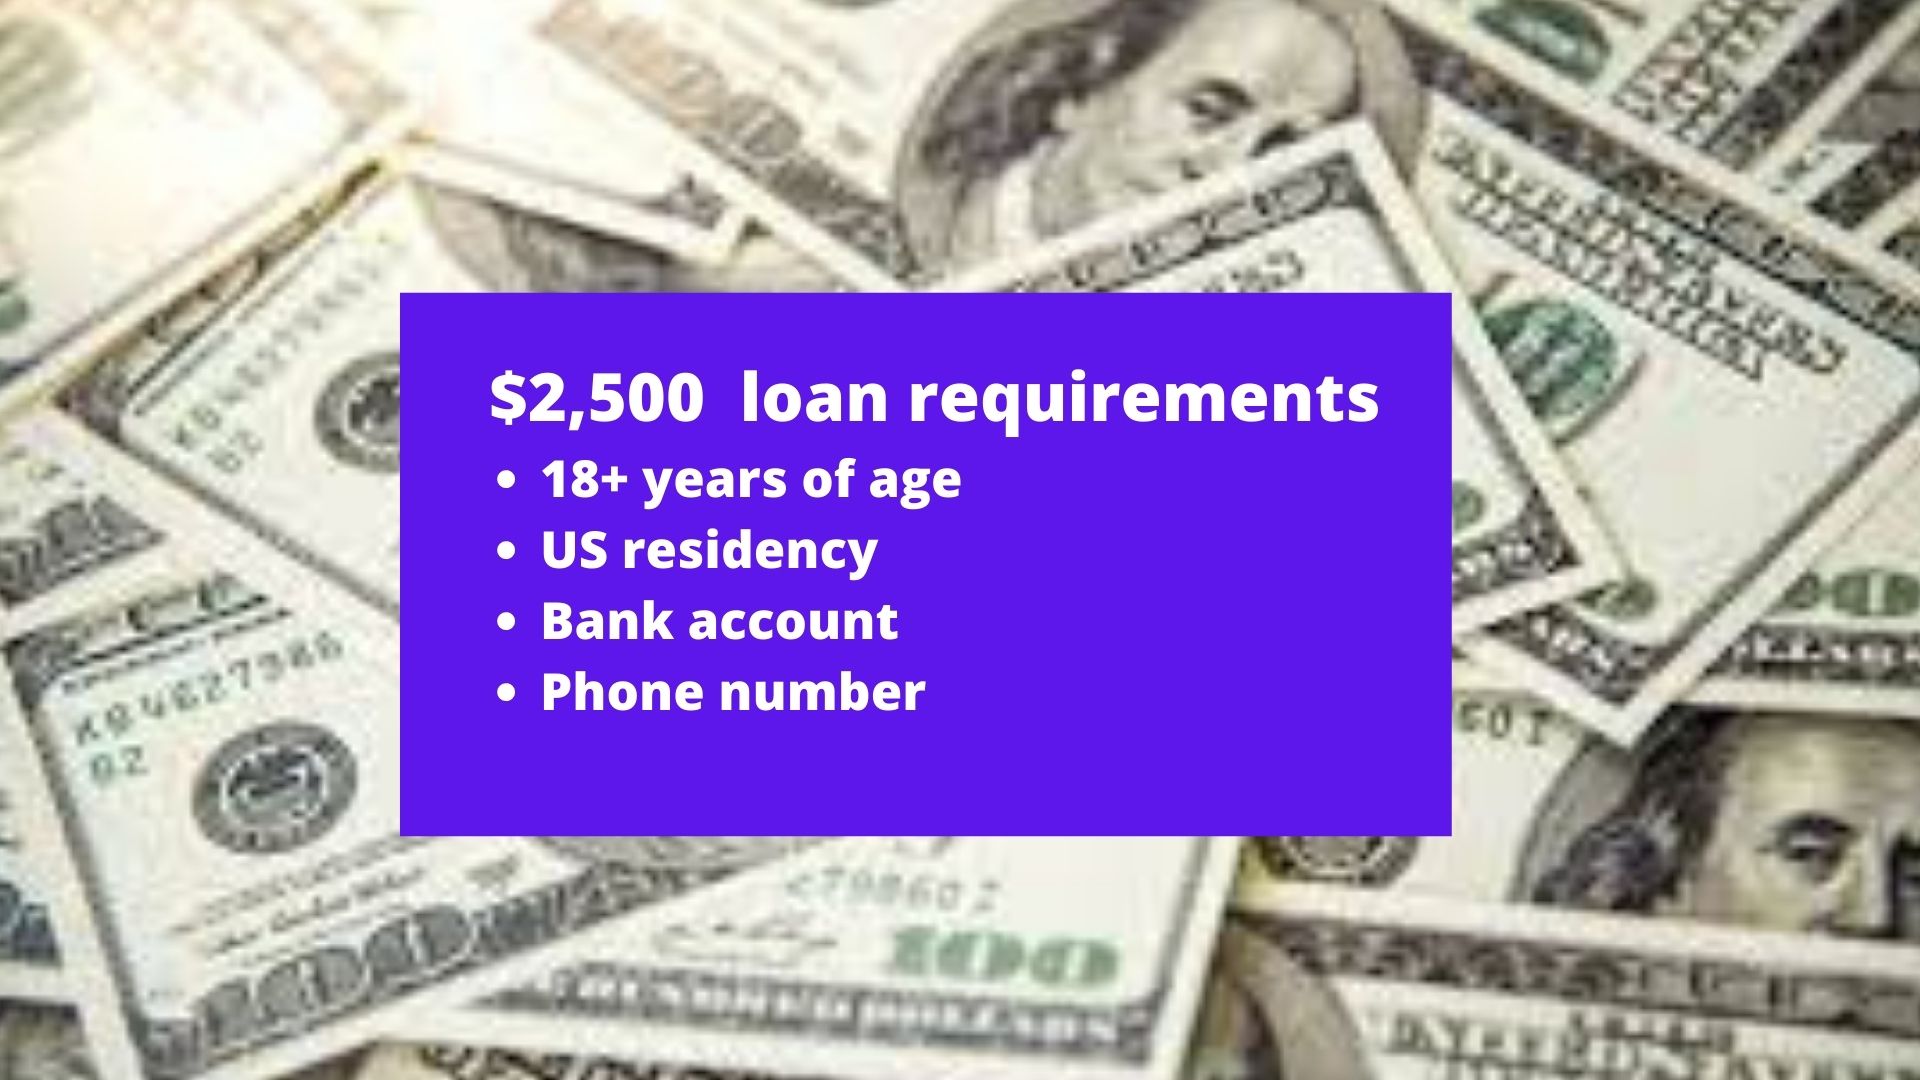 to get a 2500 loan you need to meet some requirements